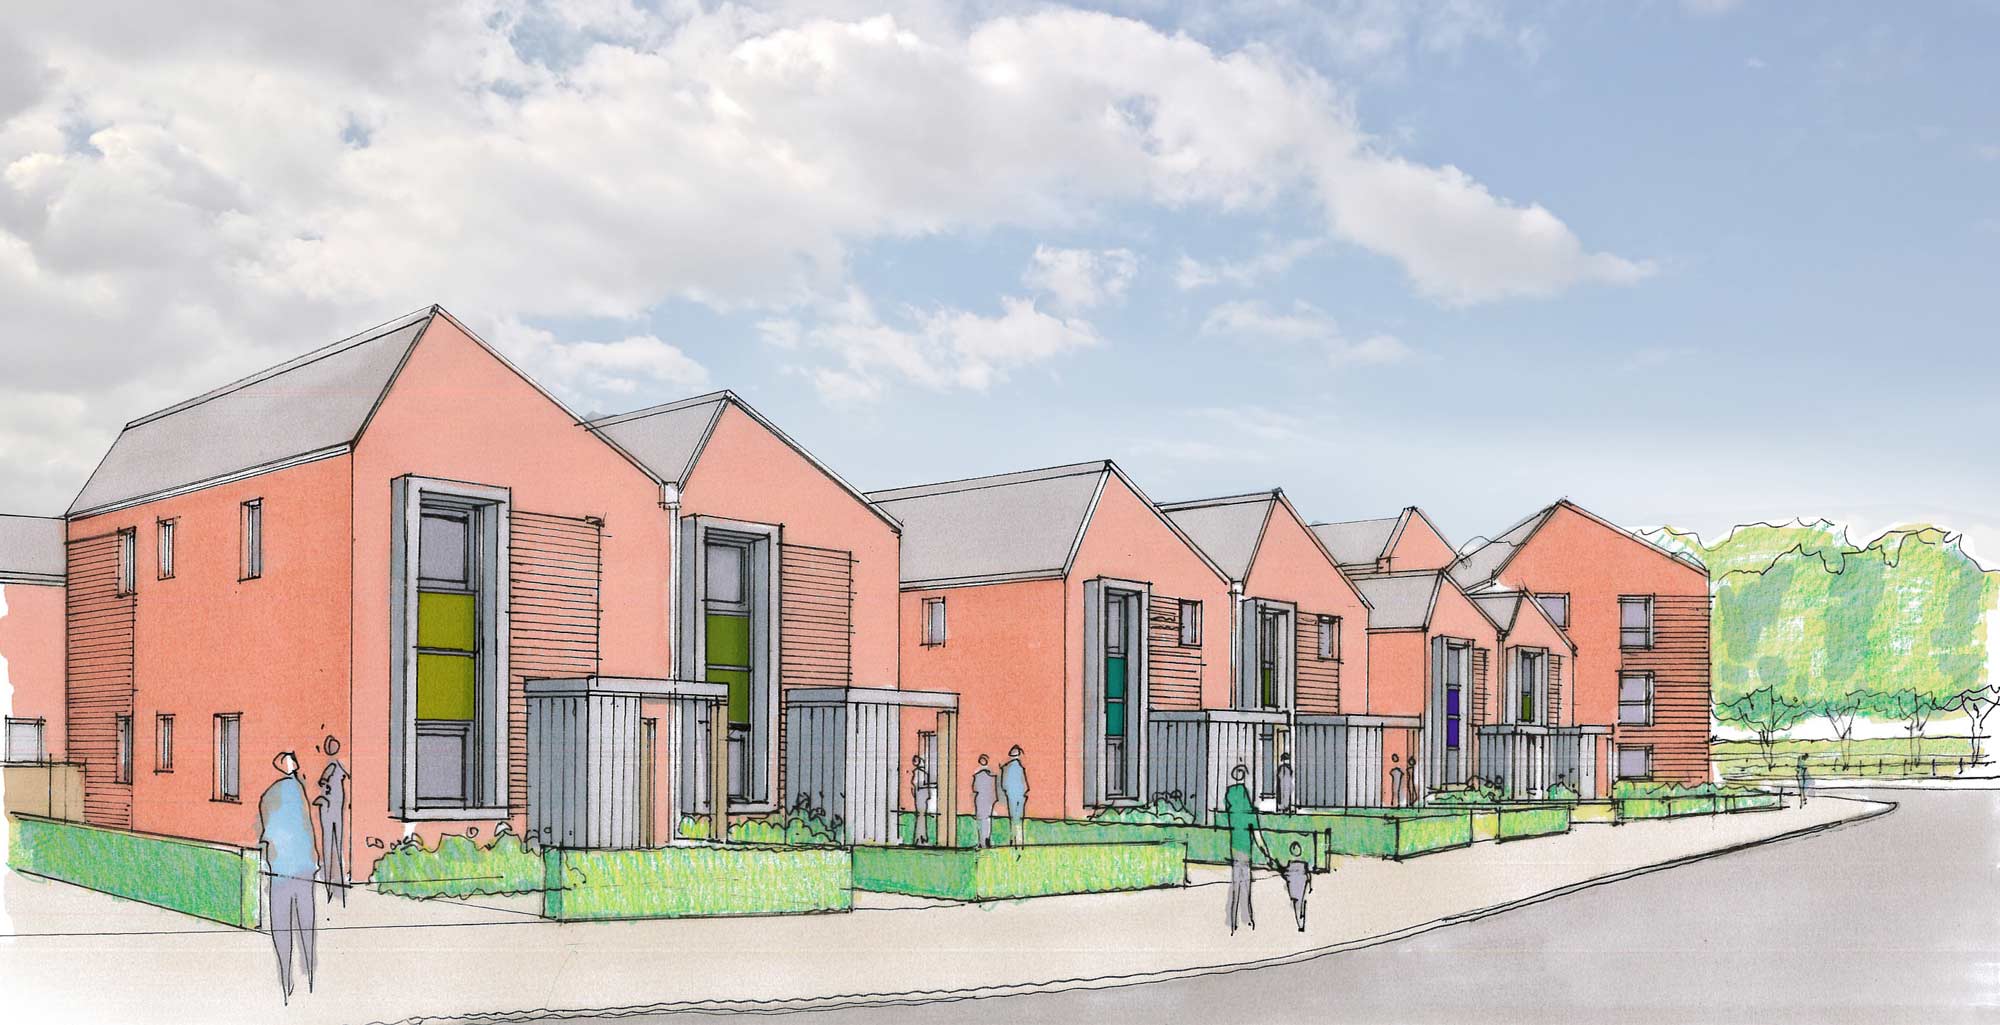 Leeds City Council and United Living propose UK’s largest modular council housing development